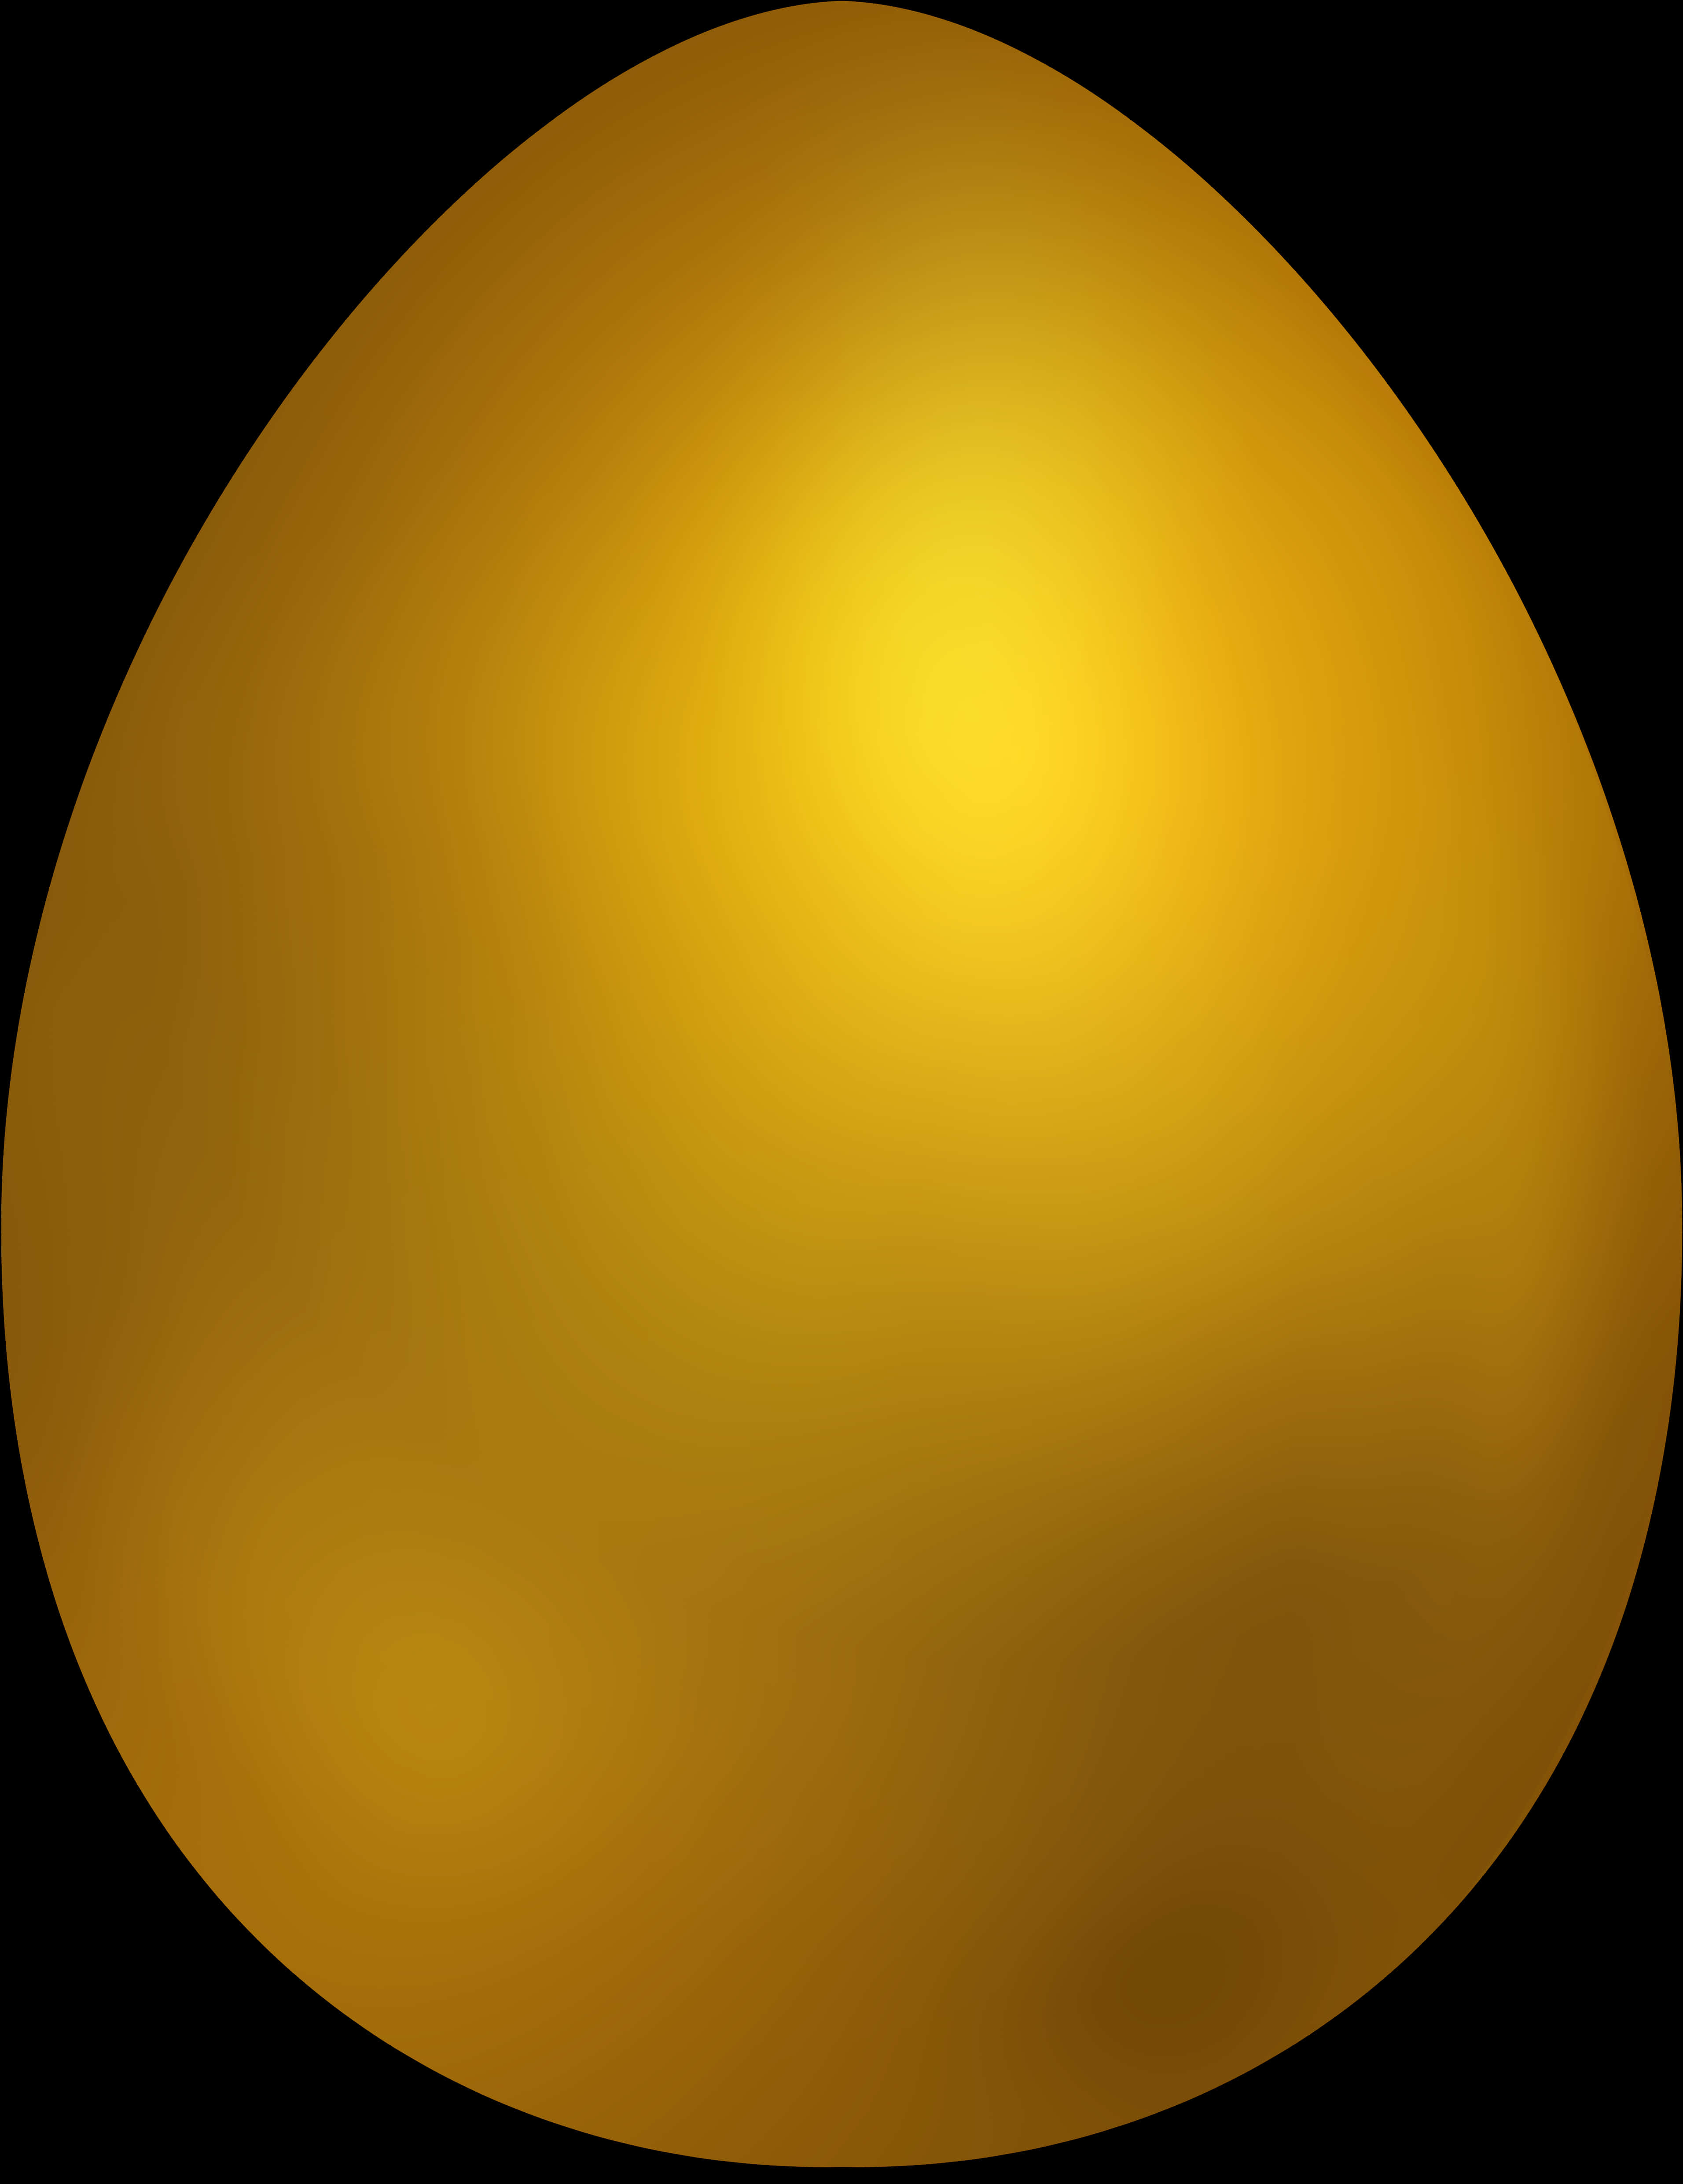 A Gold Egg With Black Background